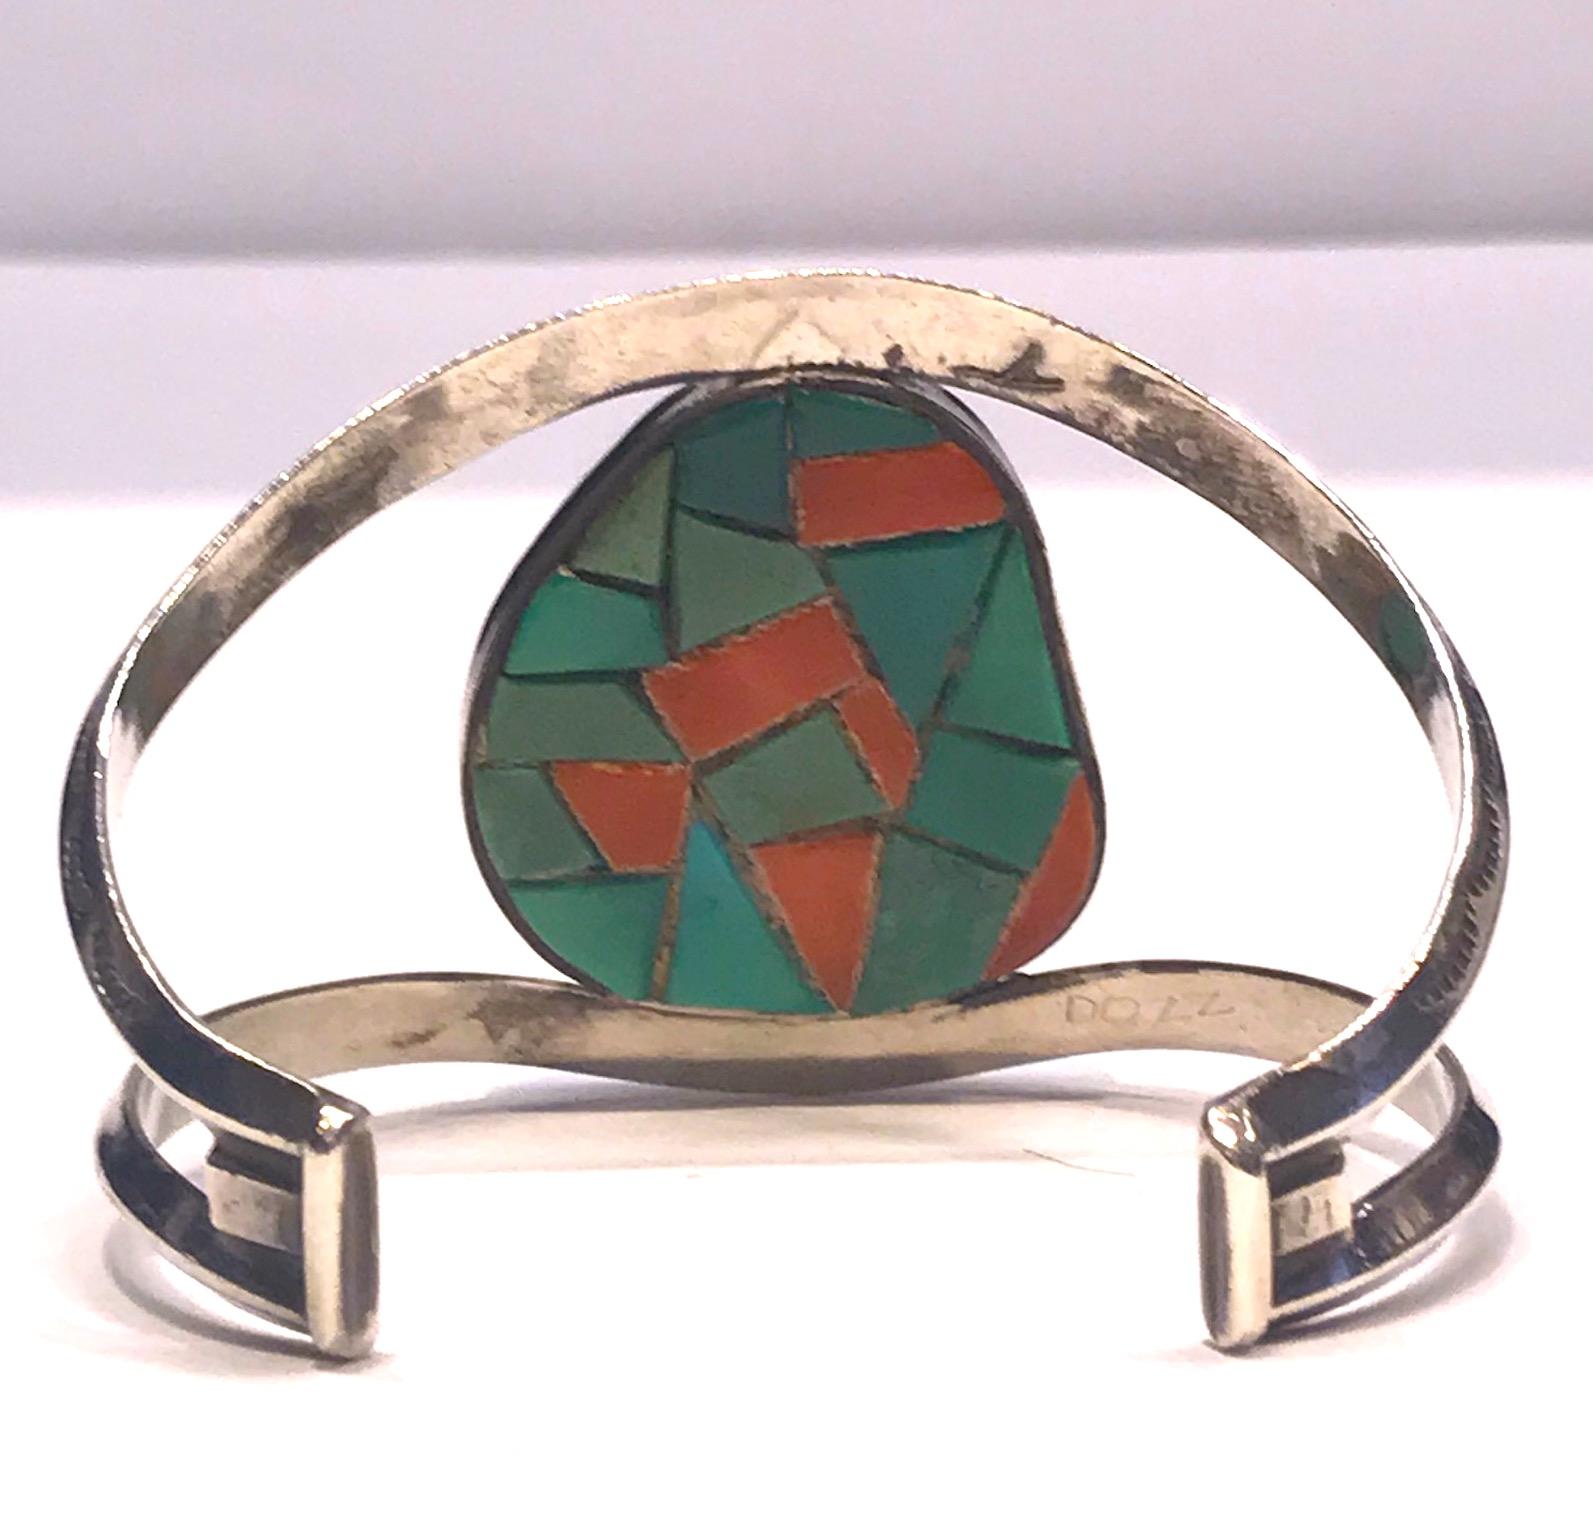 
This Navajo sterling silver wire cuff bracelet, circa 1970, is beautifully designed with an unexpected element of surprise and healing. Two decorated sturdy sterling wires support the large turquoise central stone. Each of the wire bands is